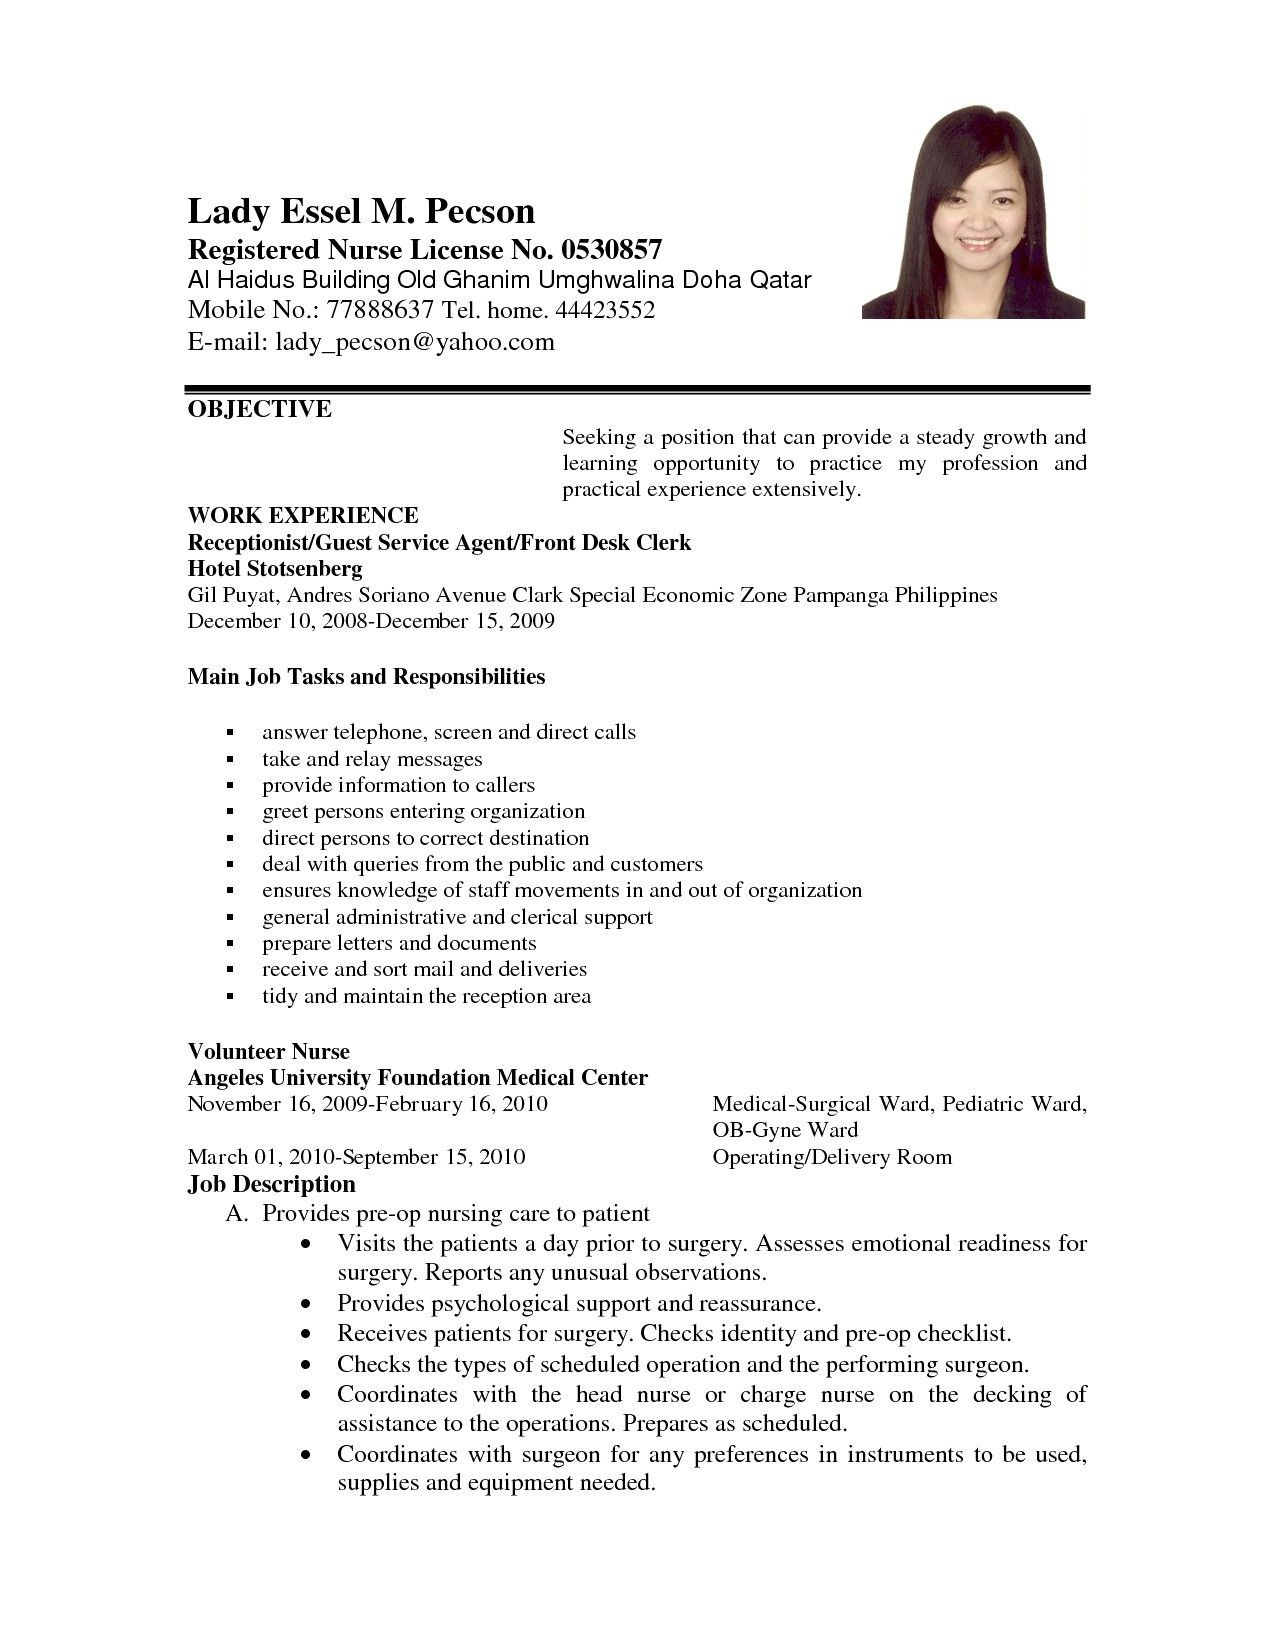 Resume Objective Sample for Experienced It Professionals Career Objective Resume Examples Awesome Example Applying for Job …